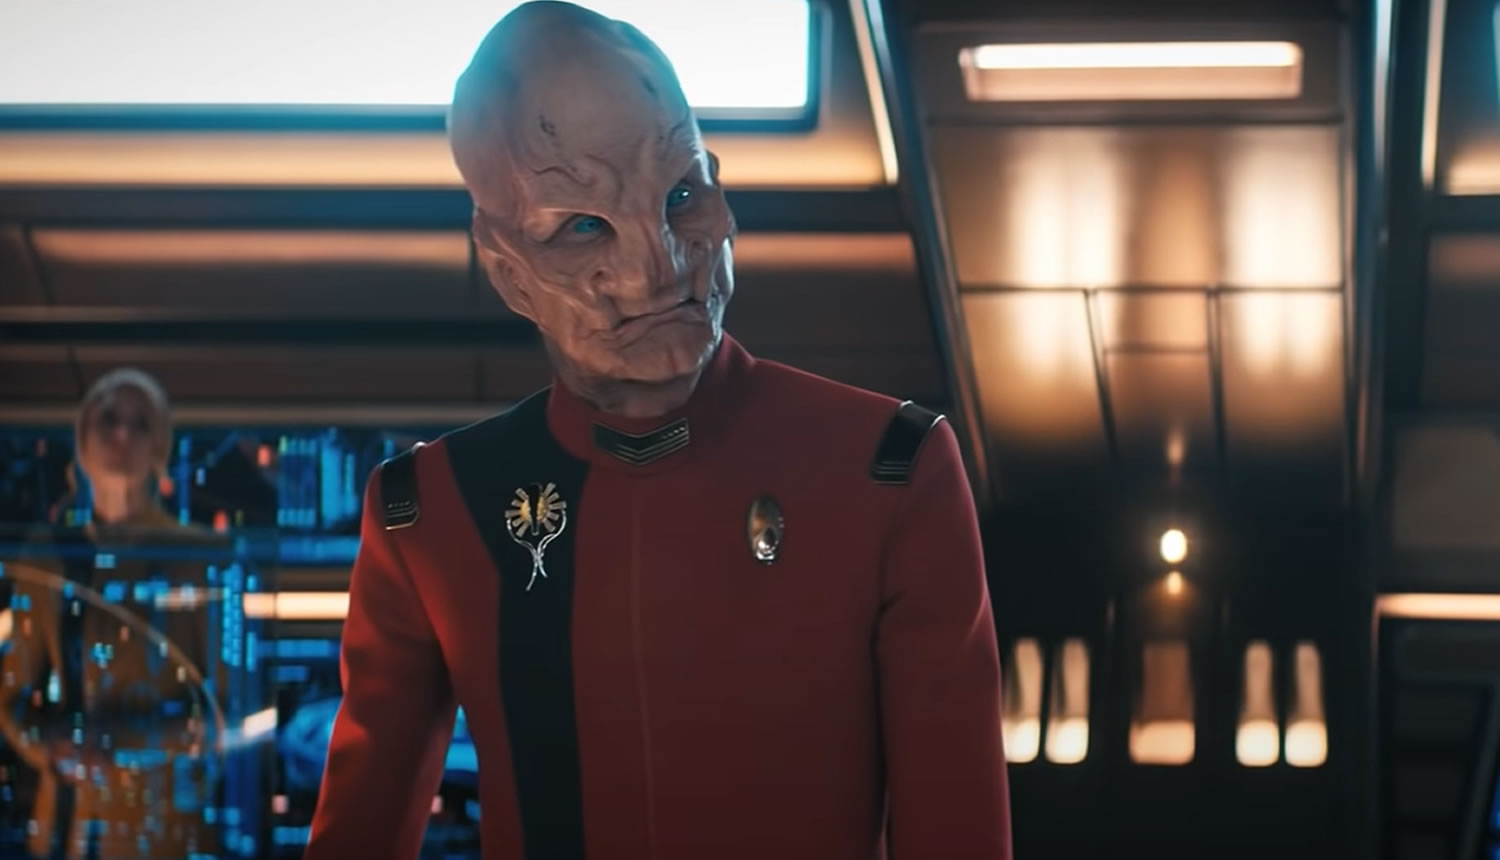 L'Rell's Klingon Boobs From Star Trek: Discovery Season 1 Are Up